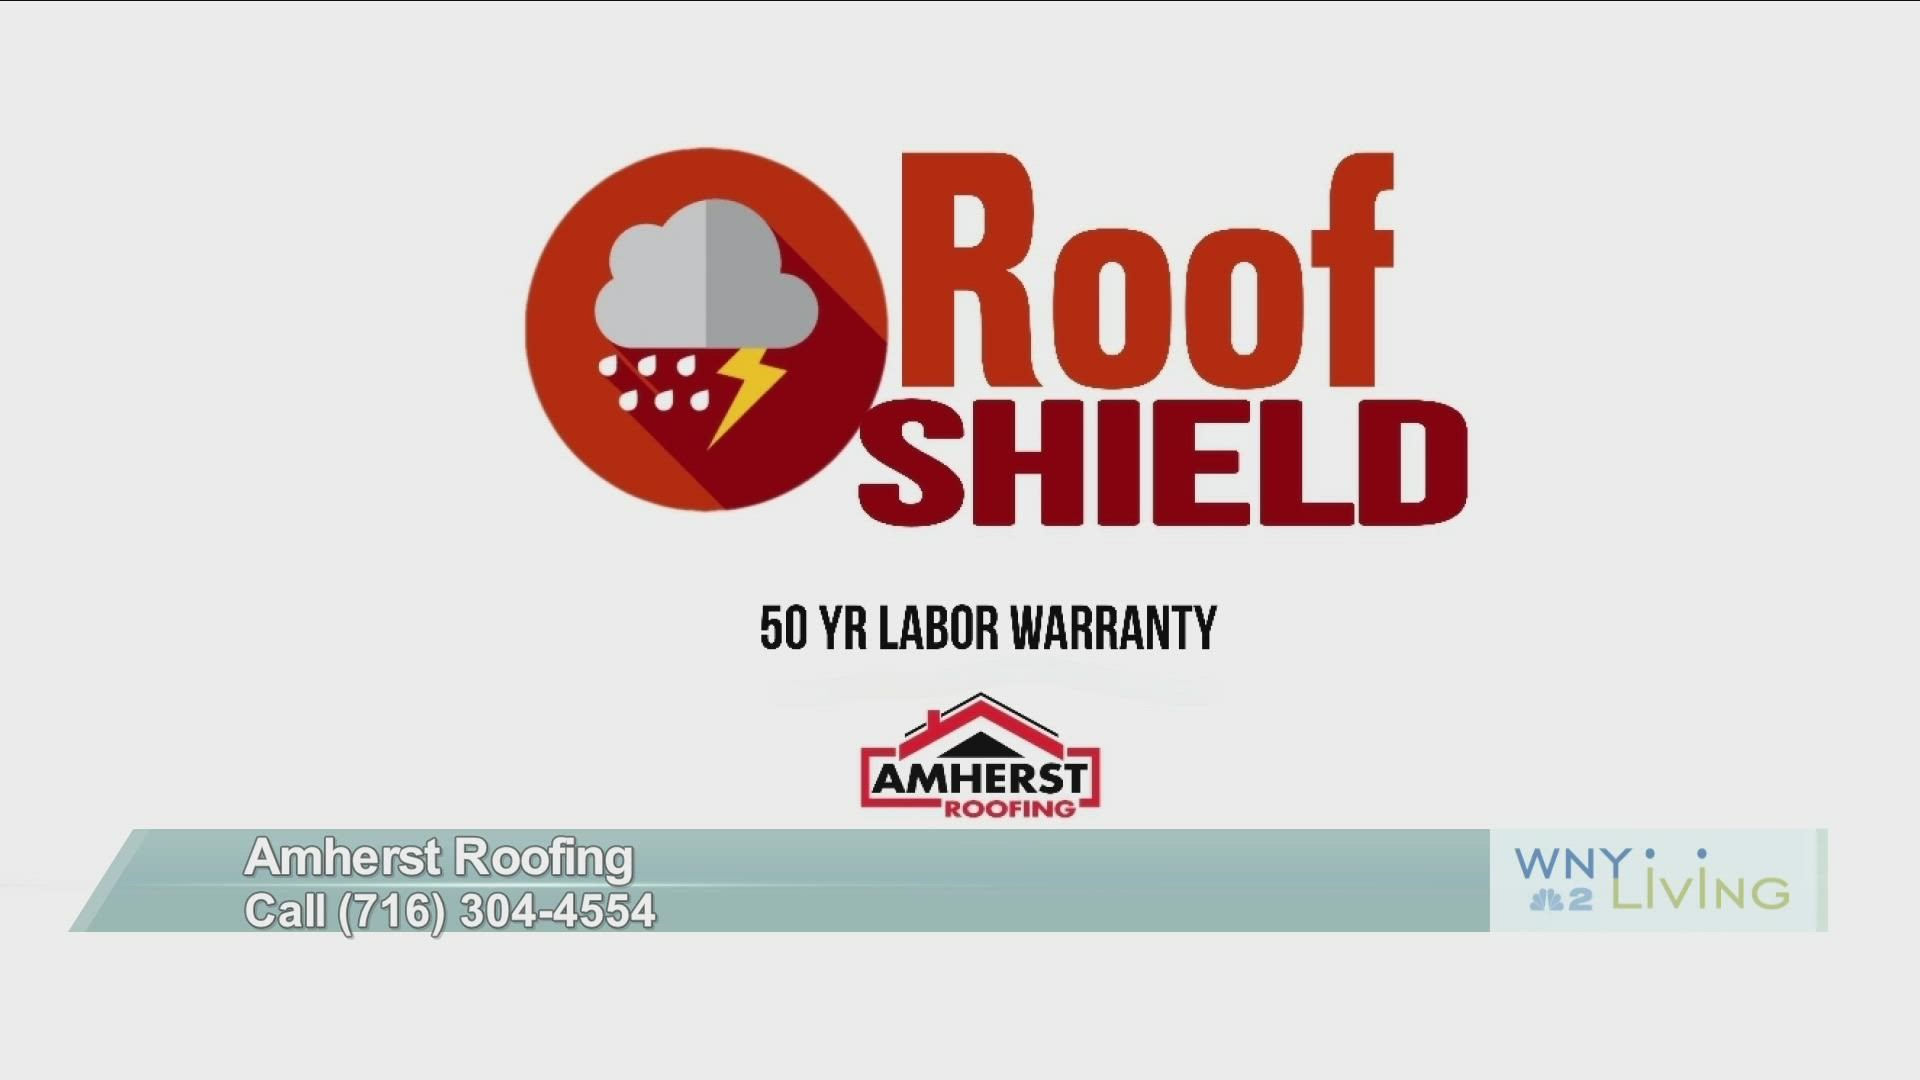 WNY Living - February 26 - Amherst Roofing (THIS VIDEO IS SPONSORED BY AMHERST ROOFING)